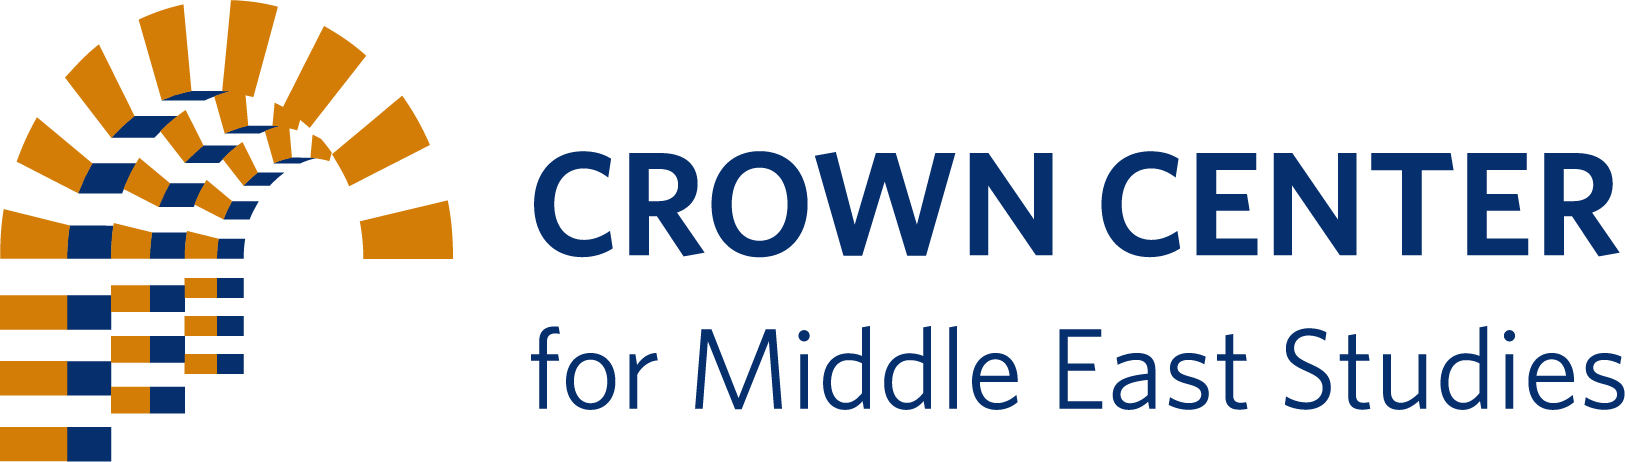 Crown Center for Middle East Studies